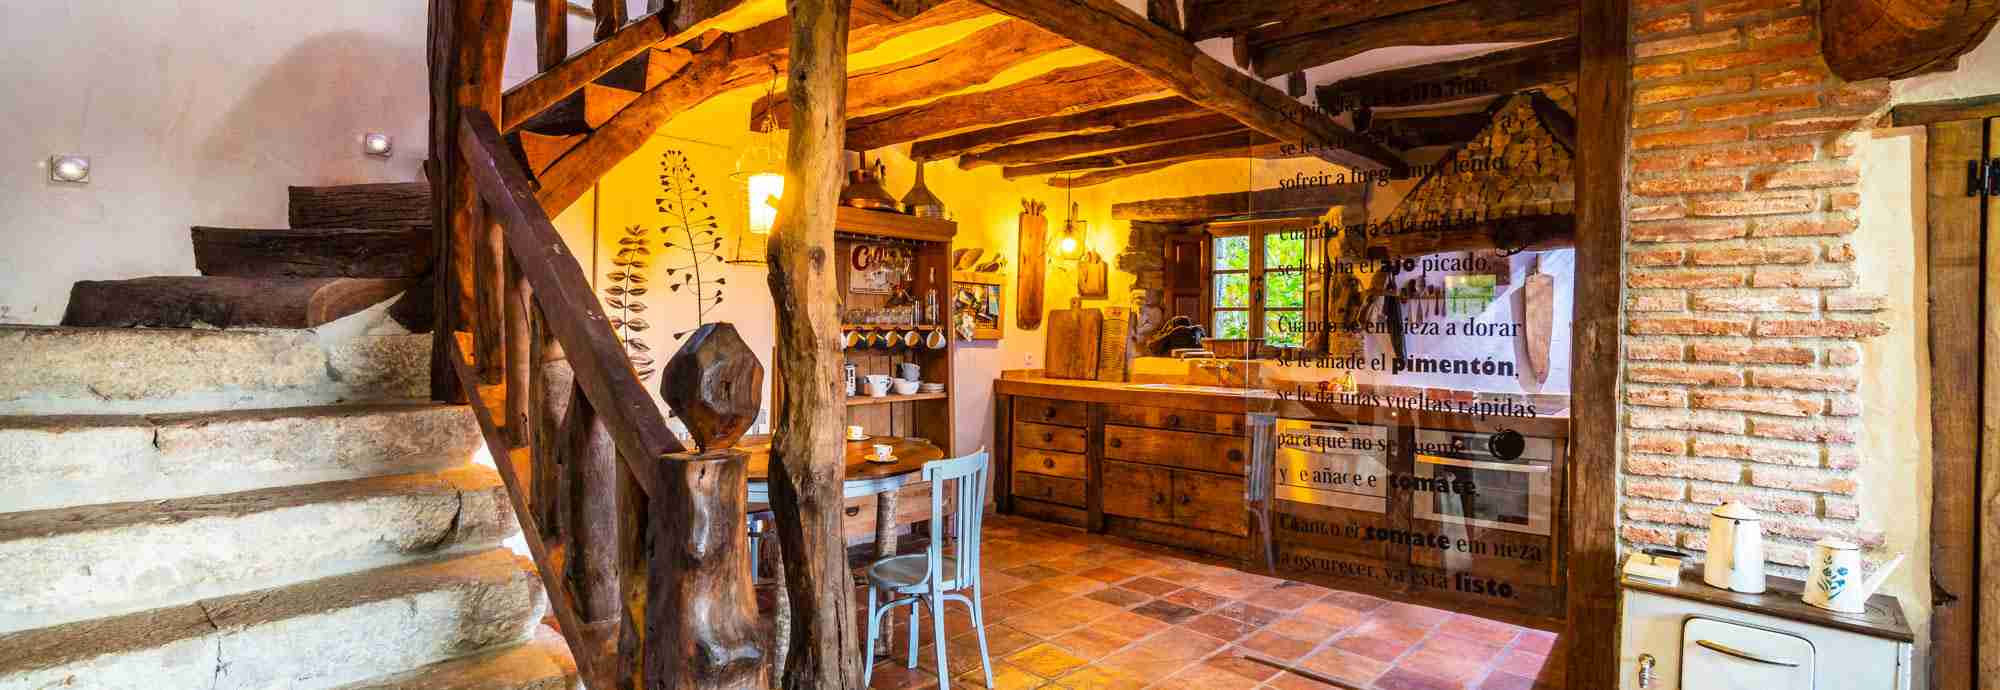 A cottage with rustic elegance in idyllic seclusion near Santander